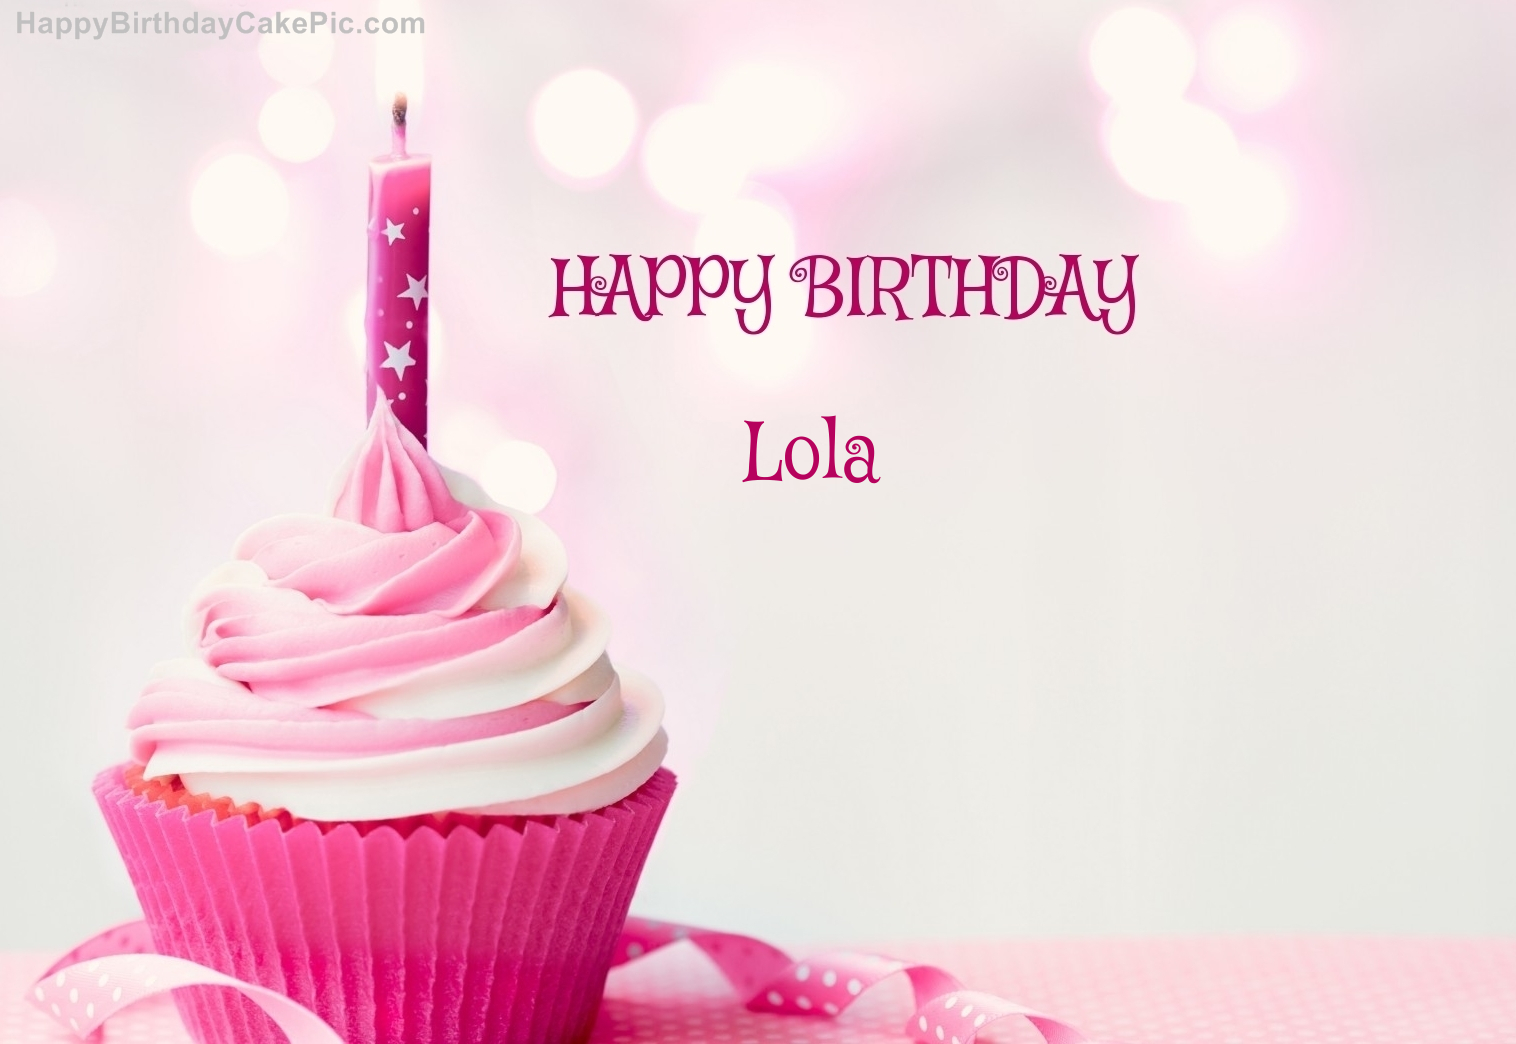 ️ Happy Birthday Cupcake Candle Pink Cake For Lola